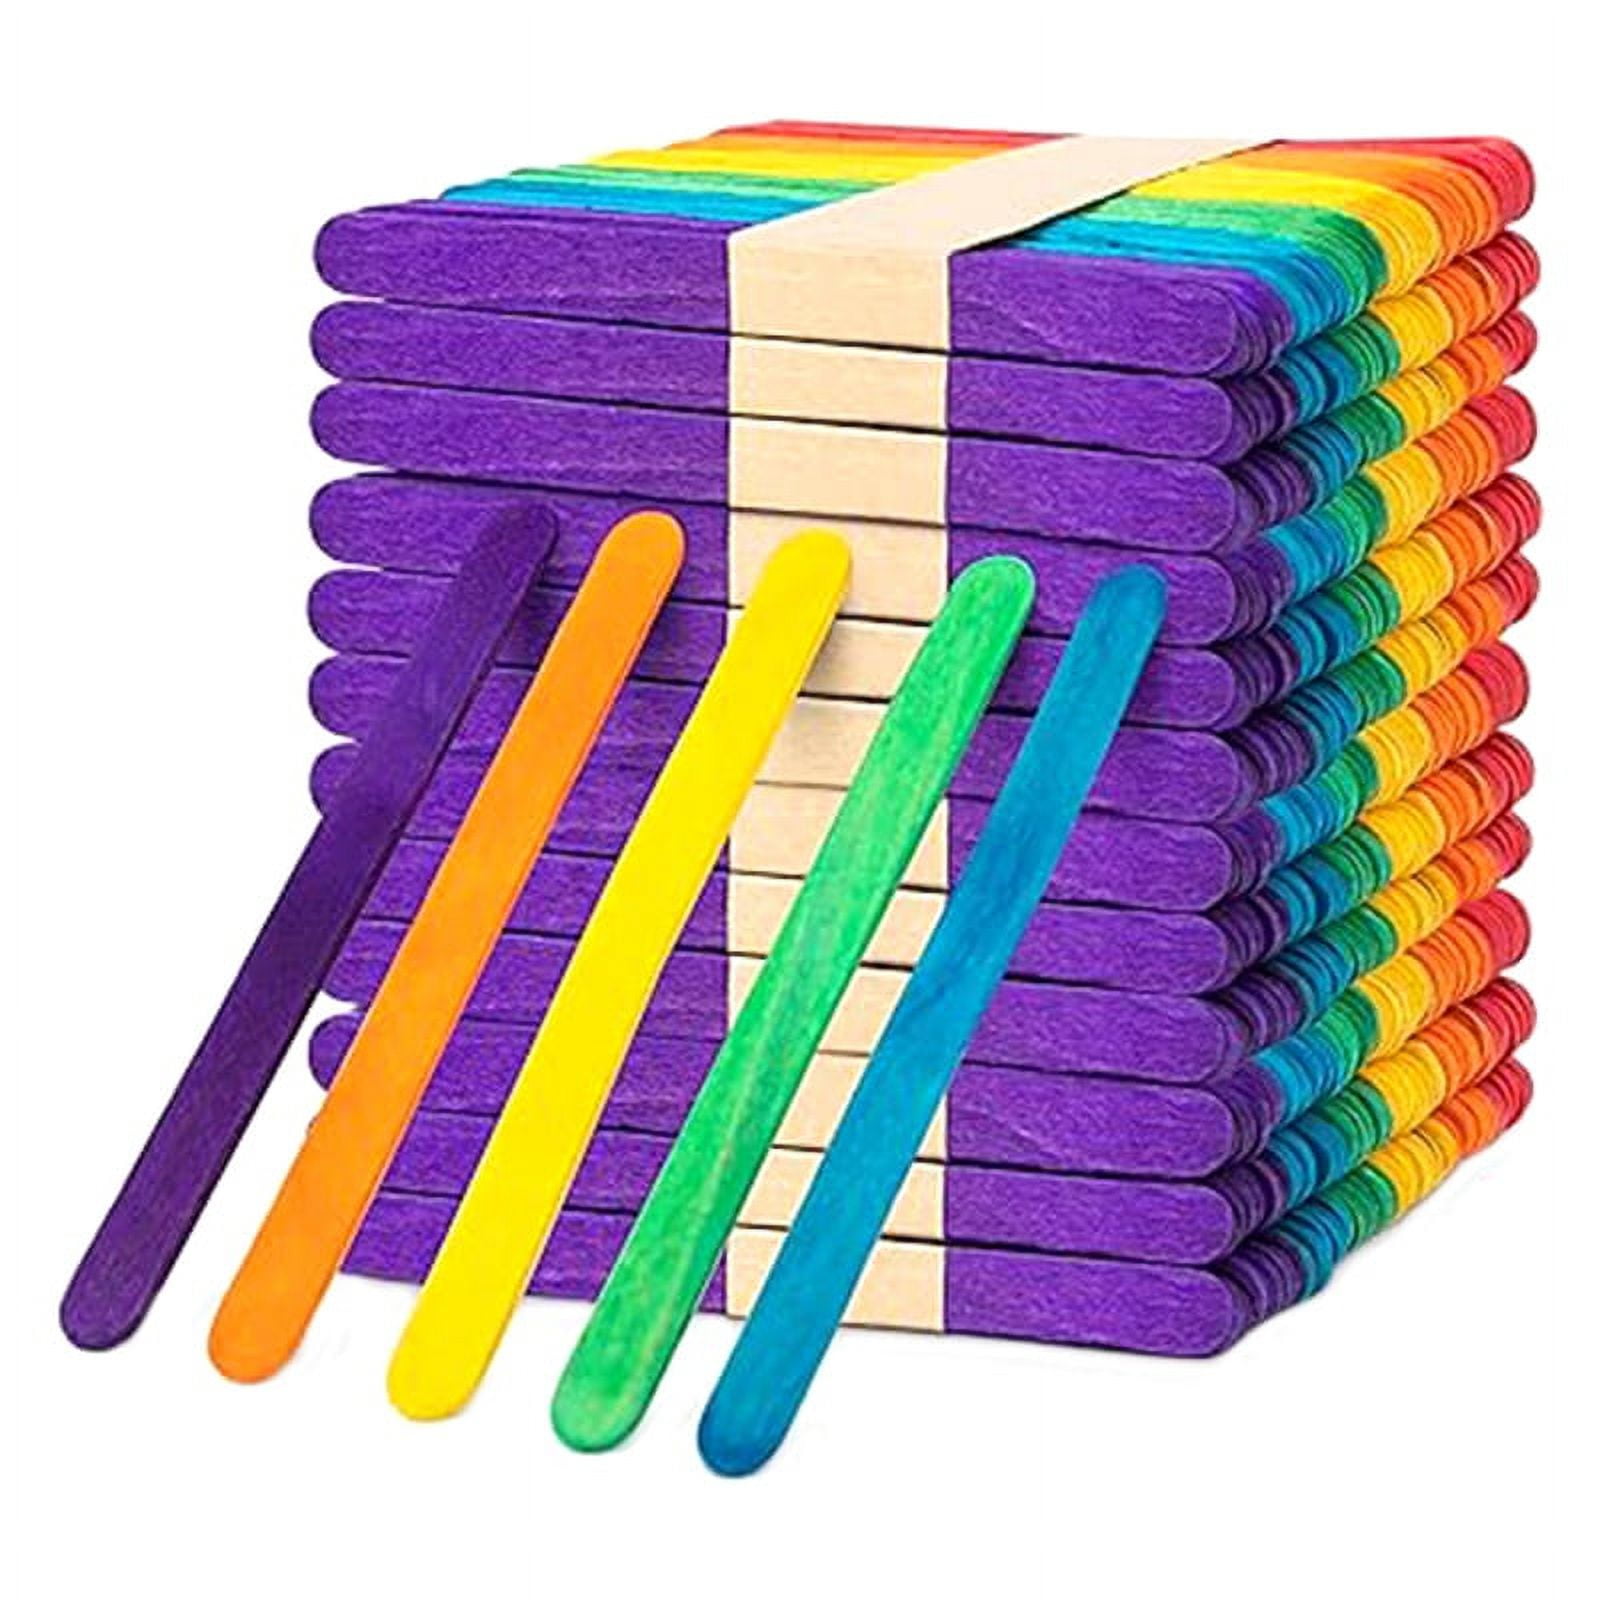 Incraftables Colored Popsicle Sticks for Crafts 600pcs 7 Colors. Large Wood Craft Sticks (4.5), Multicolor